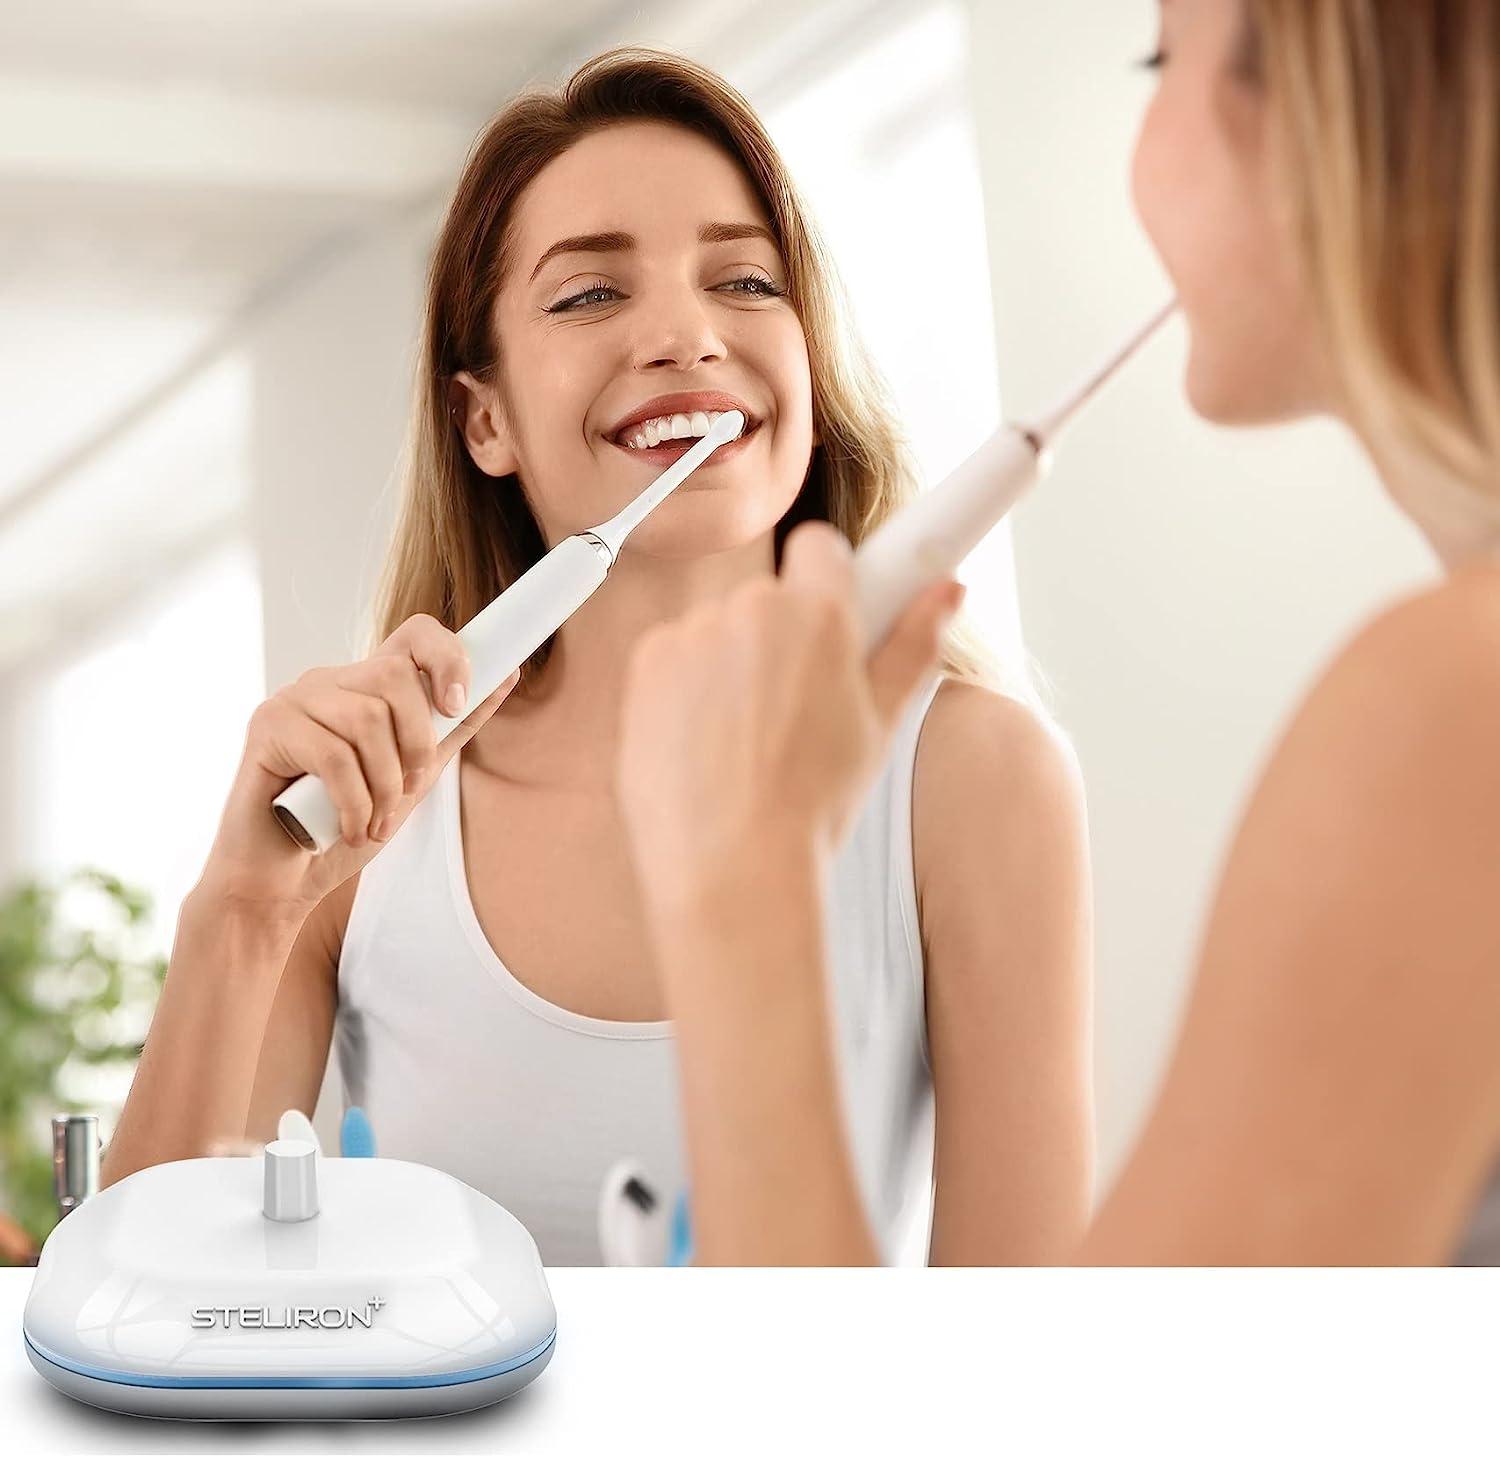 PapoeaNieuwGuinea hop applaus Waterproof Replacement Philips Sonicare Charger Base, Electric Toothbrush  and Flosser Charging with LED Indicator - Series HX4100 HX6100 HX3000  HX6000 HX8000 HX9000 and More (USB Powered)